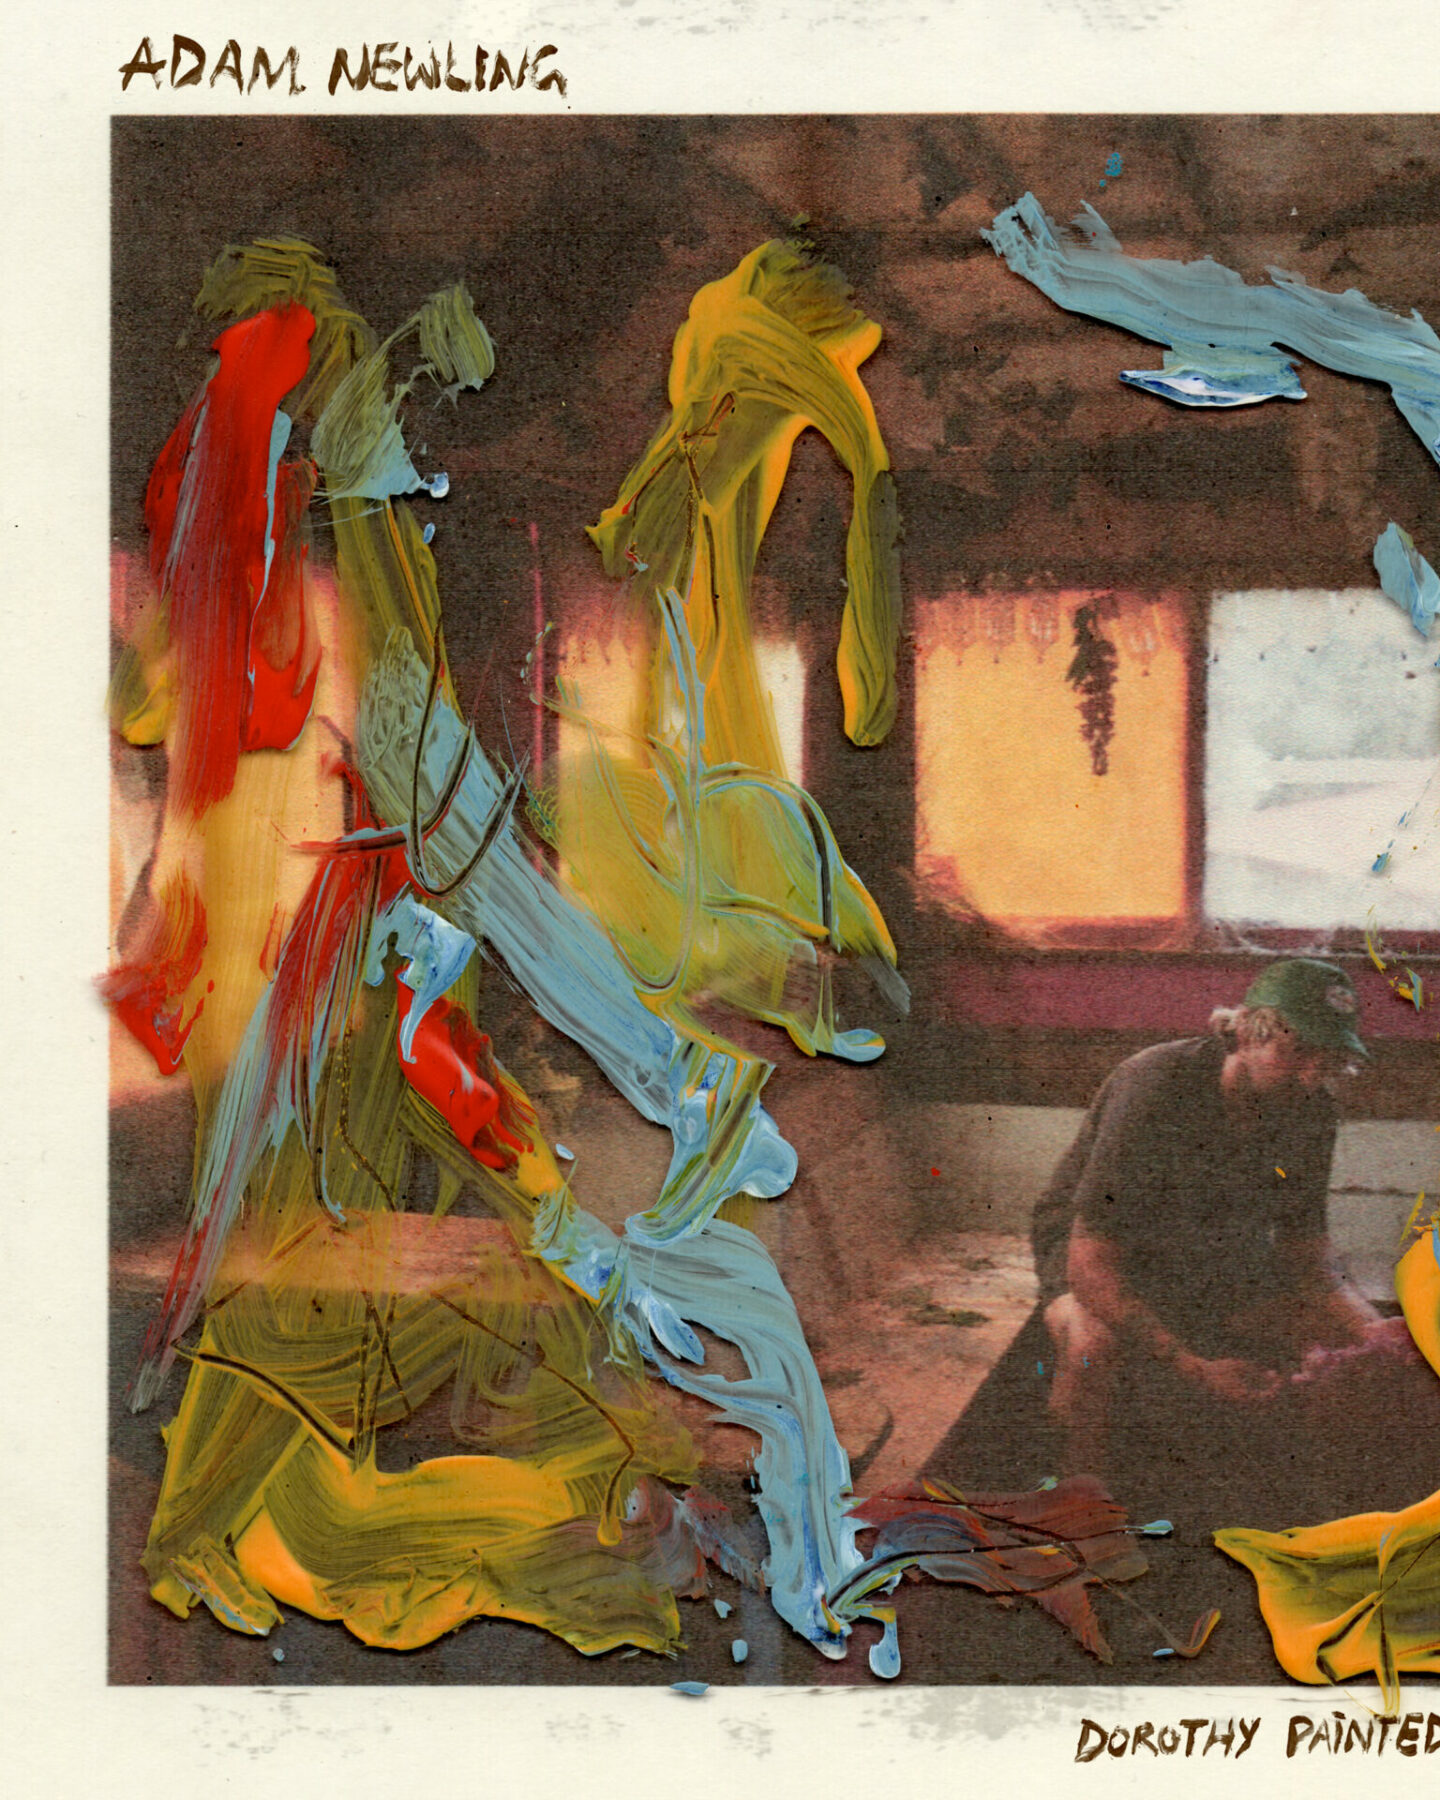 An album cove featuring blue, red and yellow streaks of paint over the top of a hazy image of a man sitting alone in a sparse room